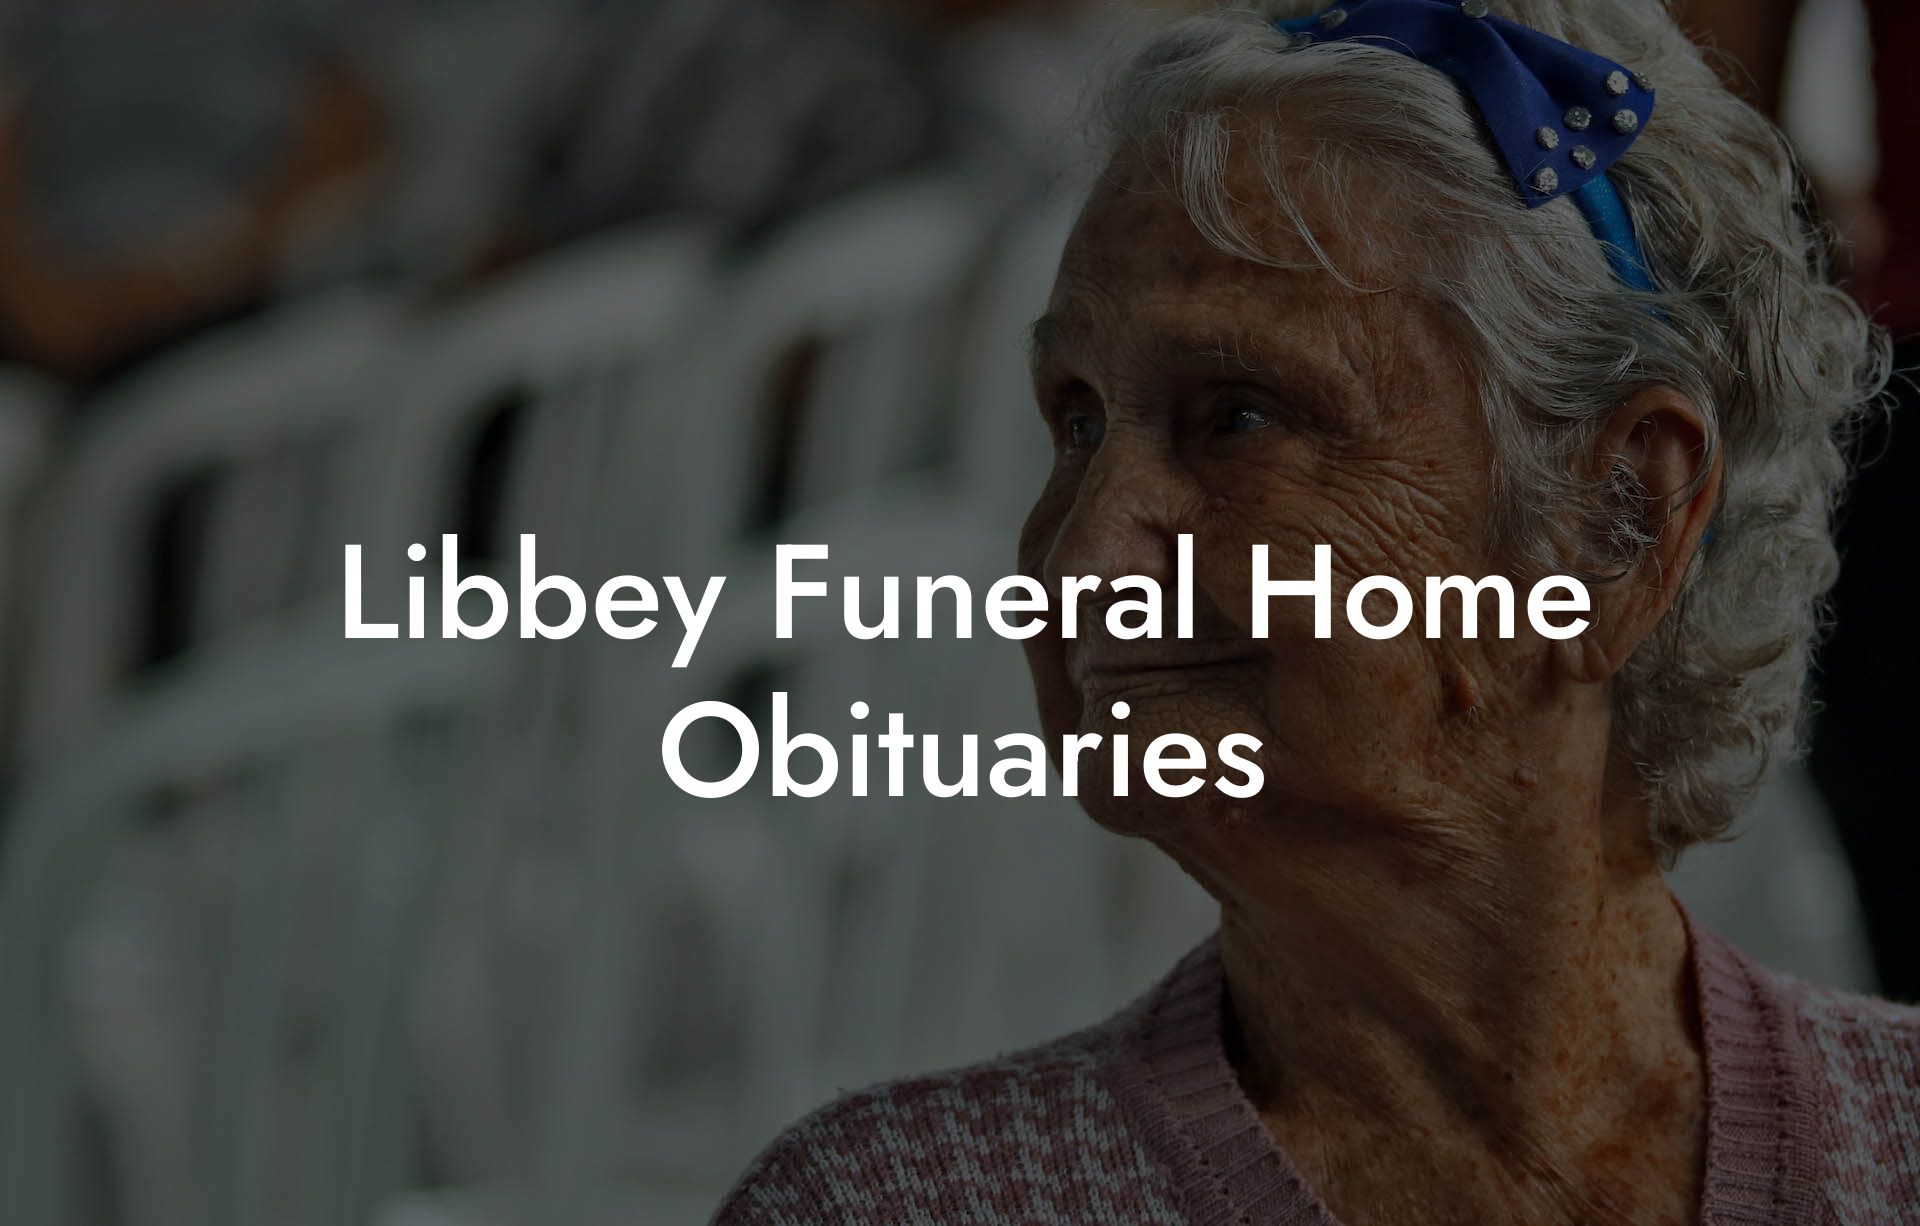 Libbey Funeral Home Obituaries